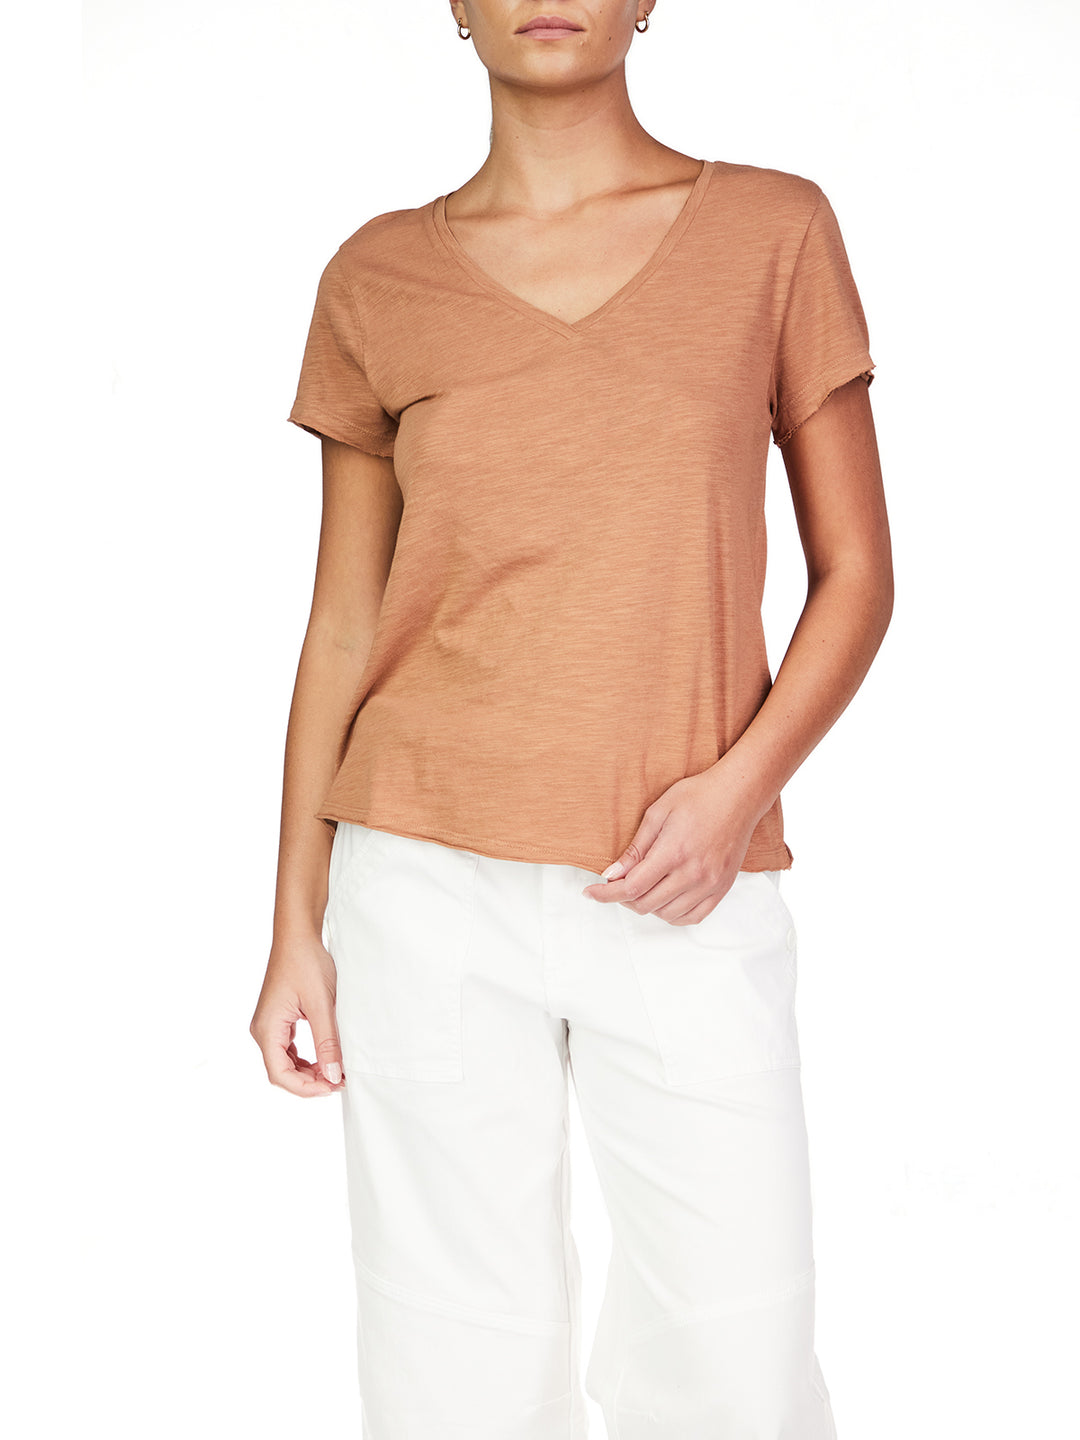 Sanctuary Carefree Tee in Mocha Mousse